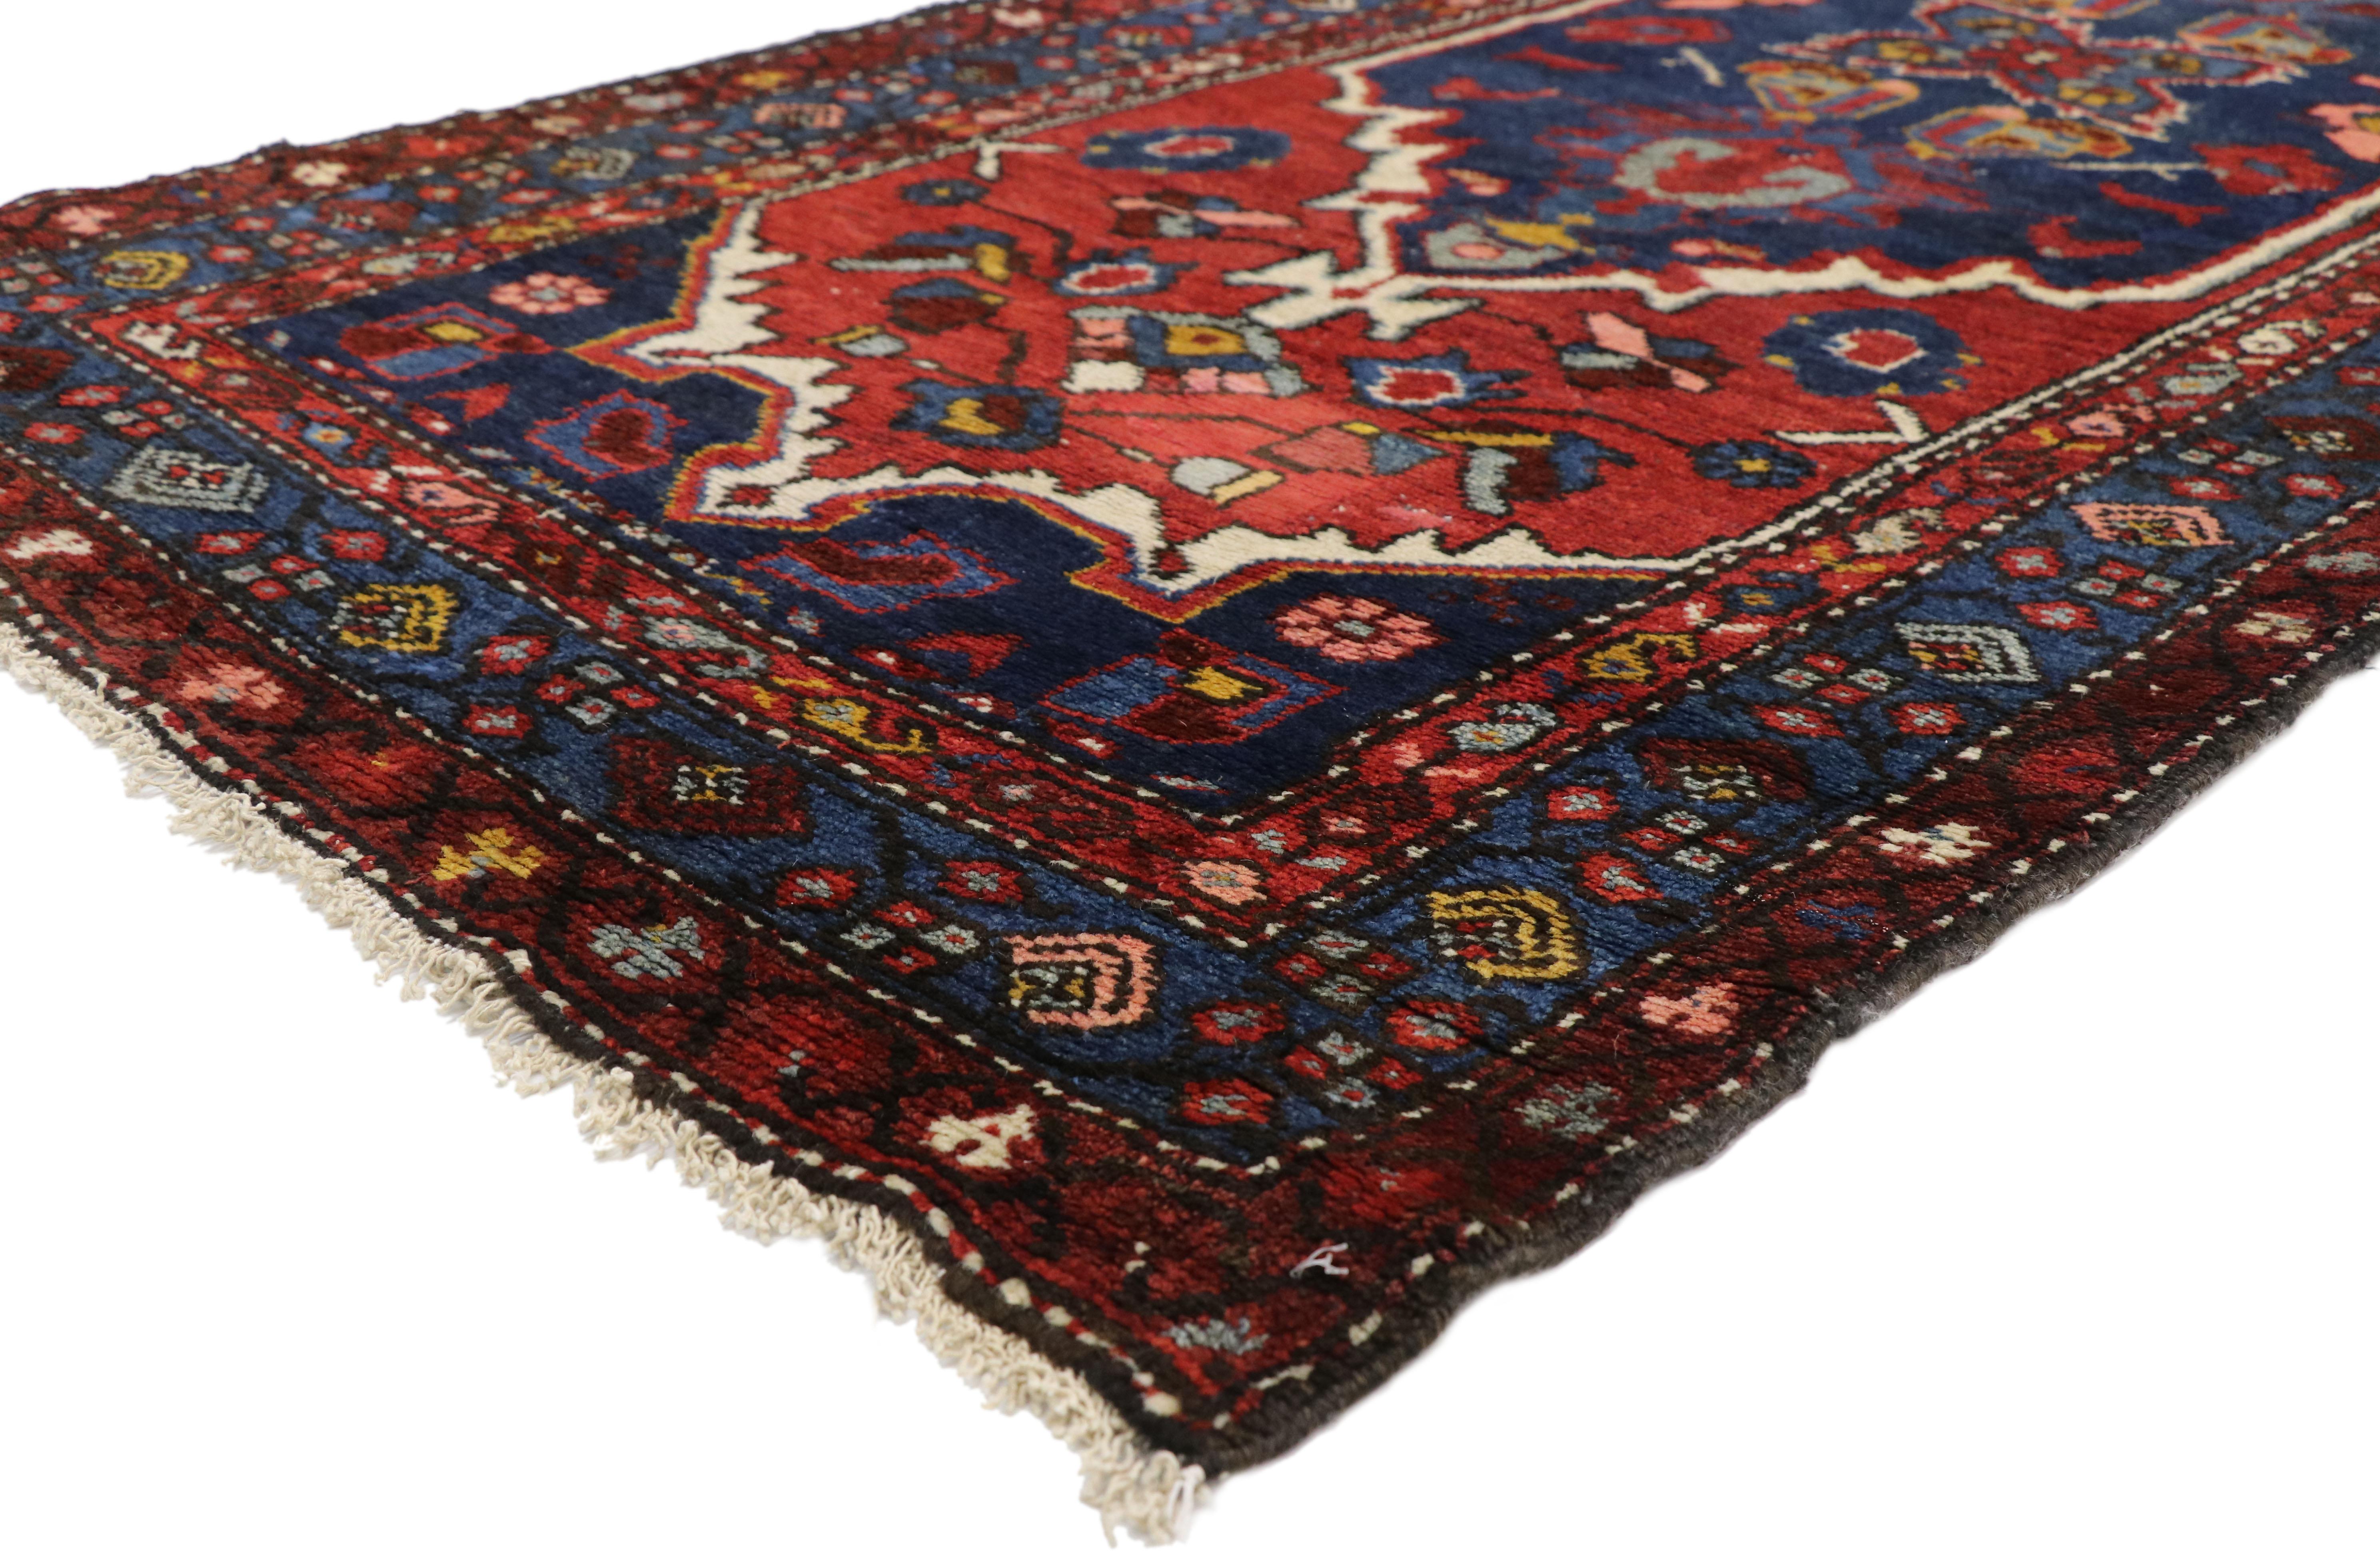 72851, antique Persian Hamadan extra-long hallway runner with English Manor Tudor style. Dignified with bespoke style, this antique Persian Hamadan runner features a pair of large-scale navy blue cartouche medallions outlined in ivory and surrounded